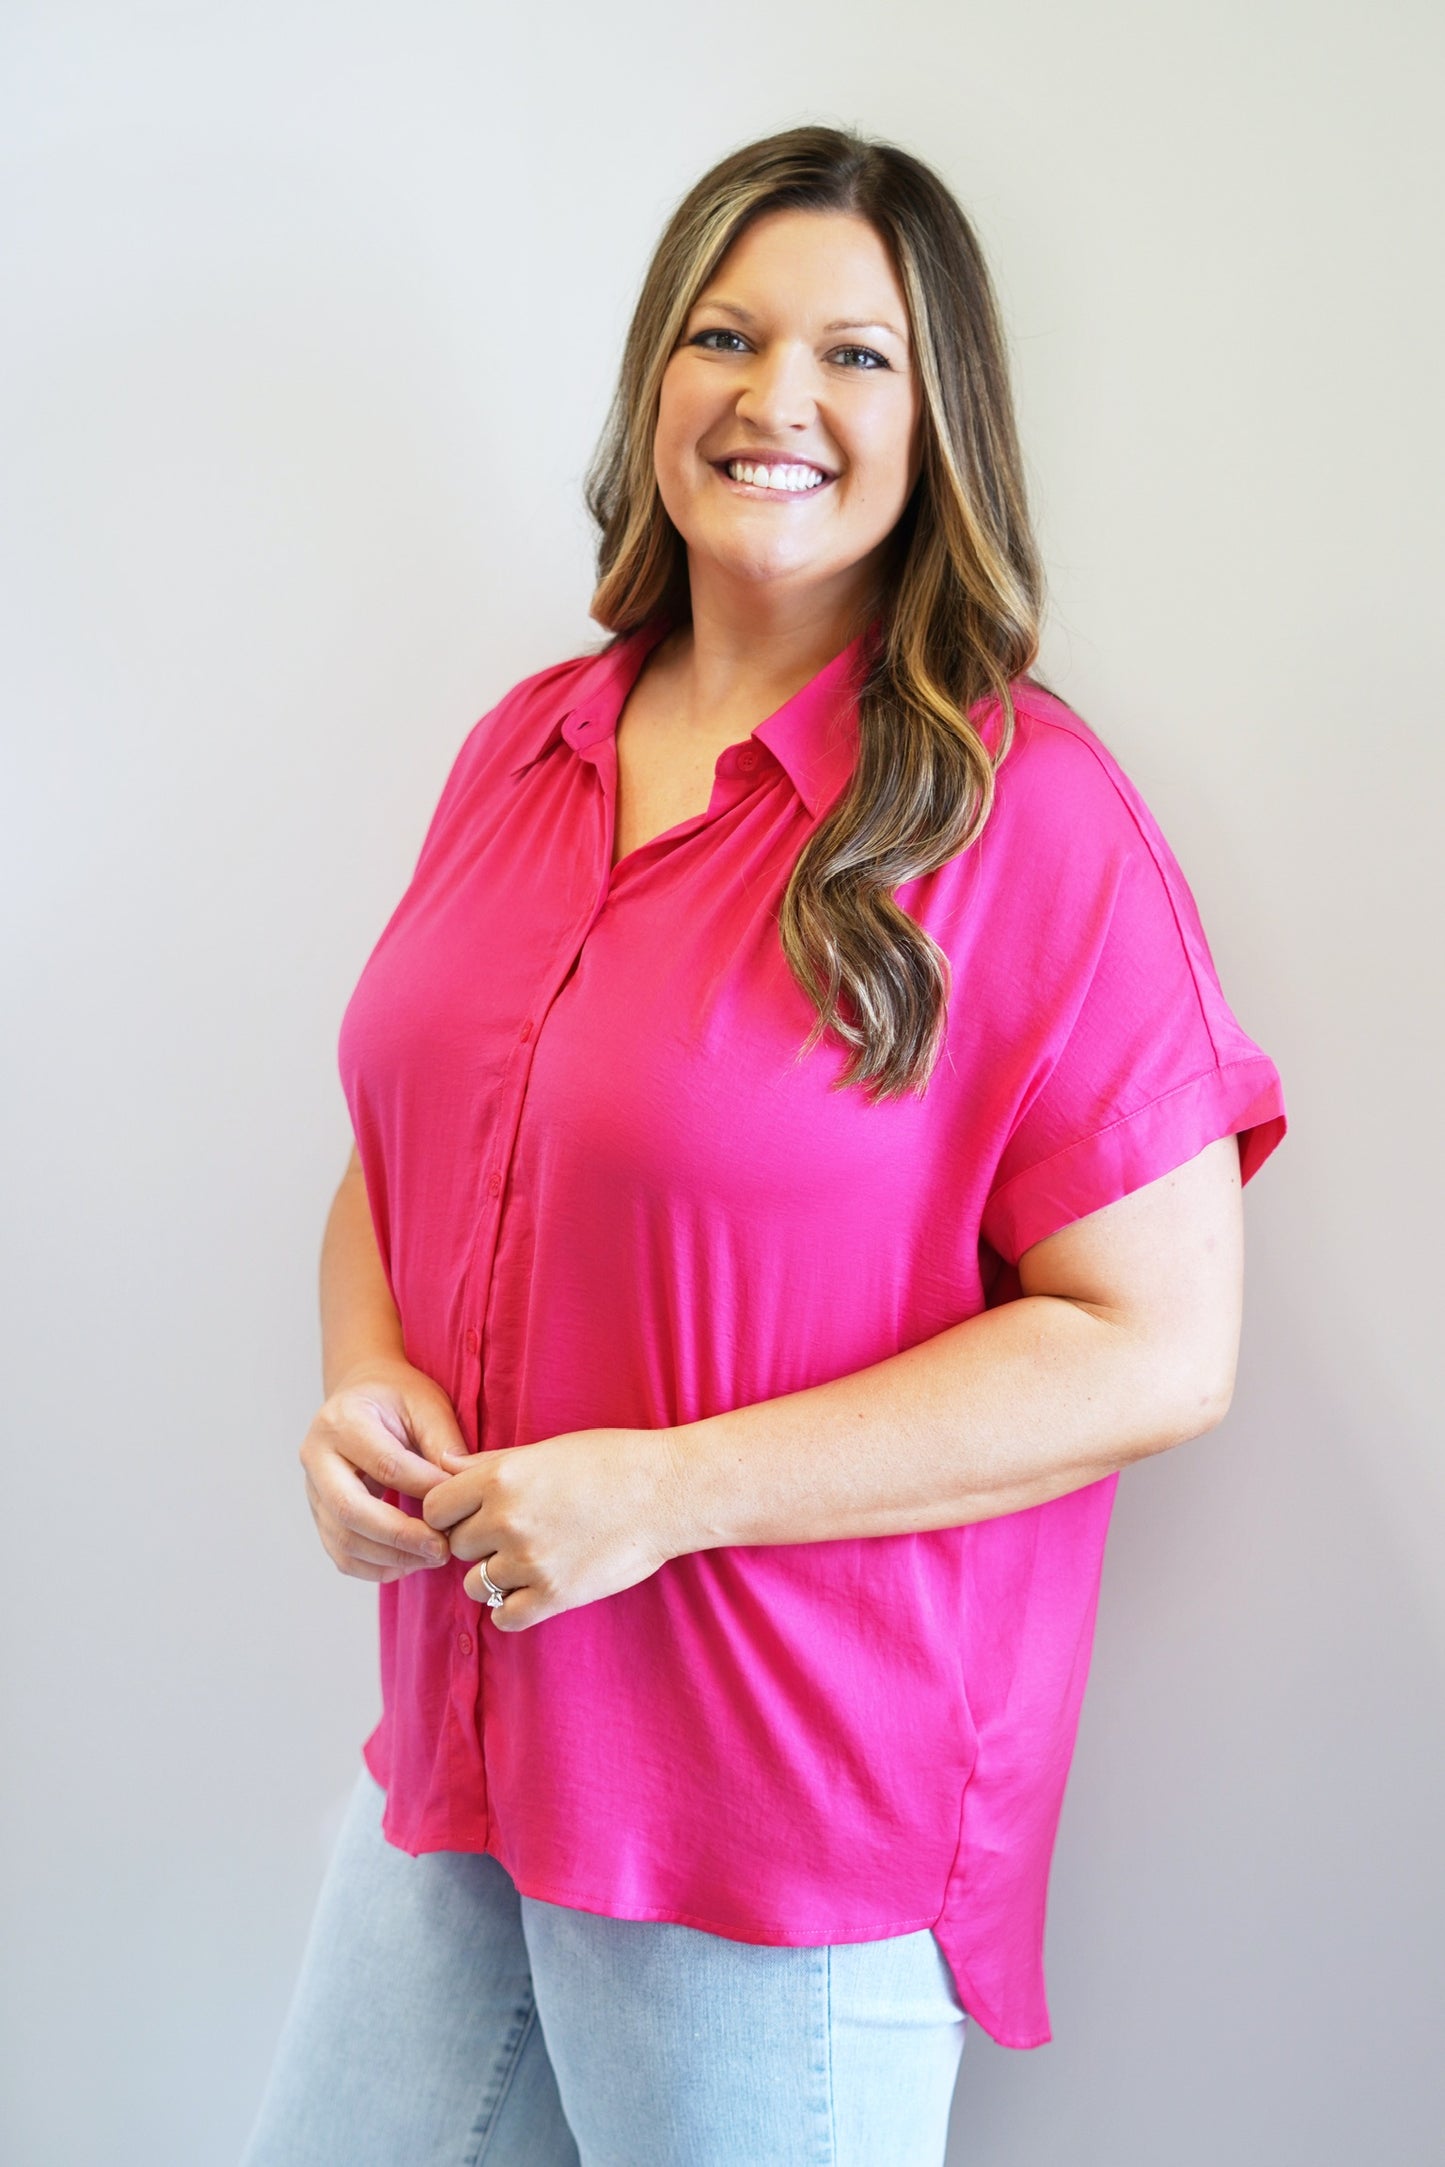 Chasity Button Up Blouse Collared Neckline Button Up Short Cap Sleeves Colors: Emerald and Hot Pink Loose Fit Full Length 100% Polyester Hand Wash Cold, Low Iron as Needed, Line Dry, Do Not Wring or Twist Model is wearing a size 1XL